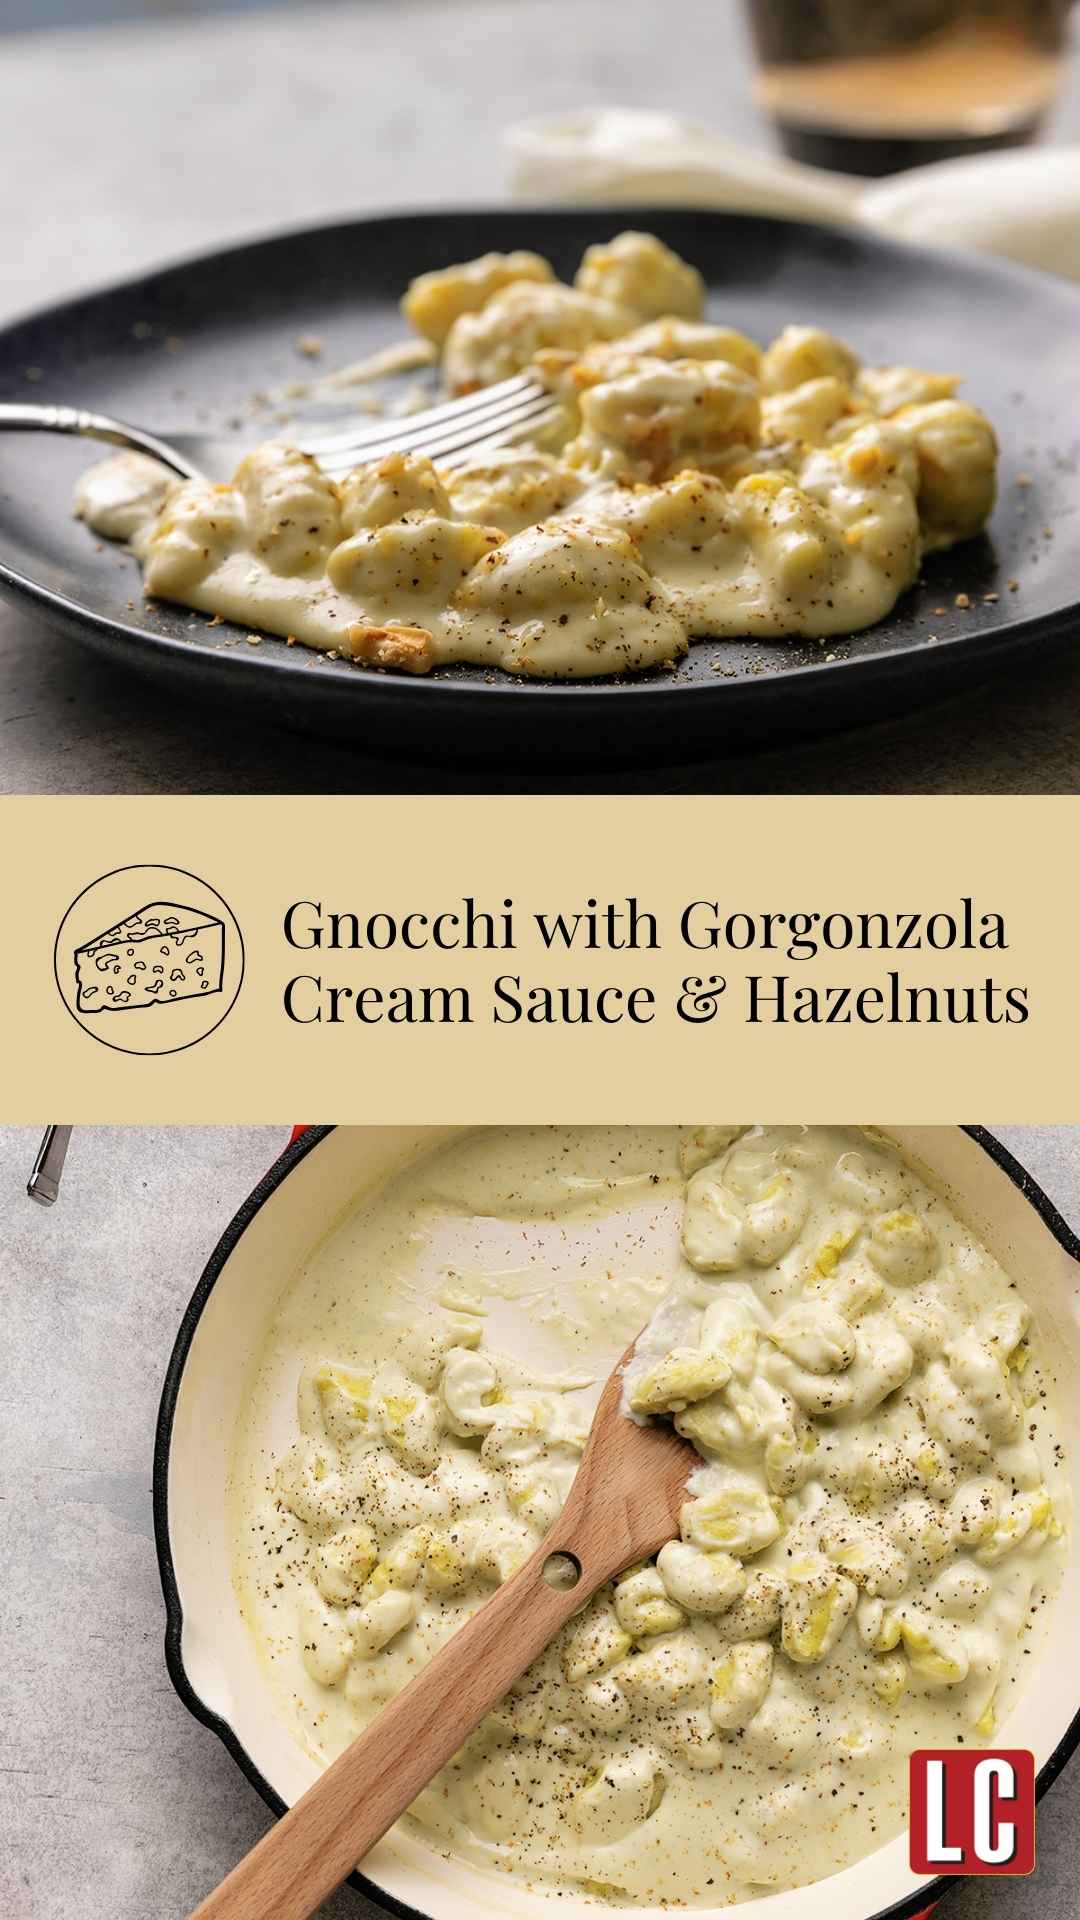 A portion of gnocchi with gorgonzola cream sauce sprinkled with chopped hazelnuts on a black plate and a skillet with the gnocchi in cream sauce.